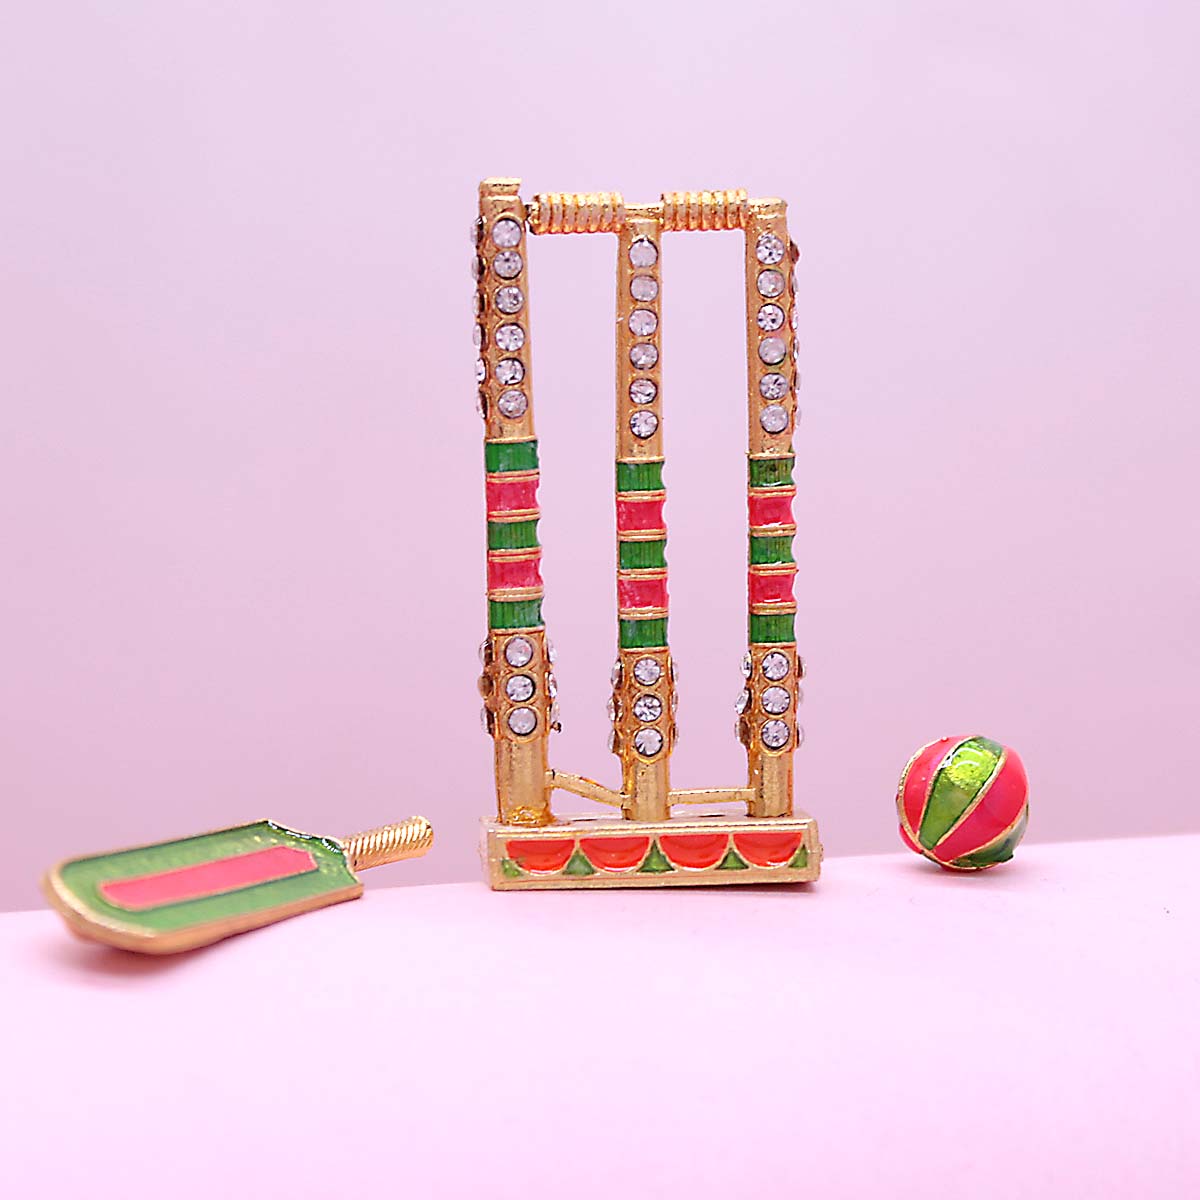 Decorated Cricket Set Toy for decoration